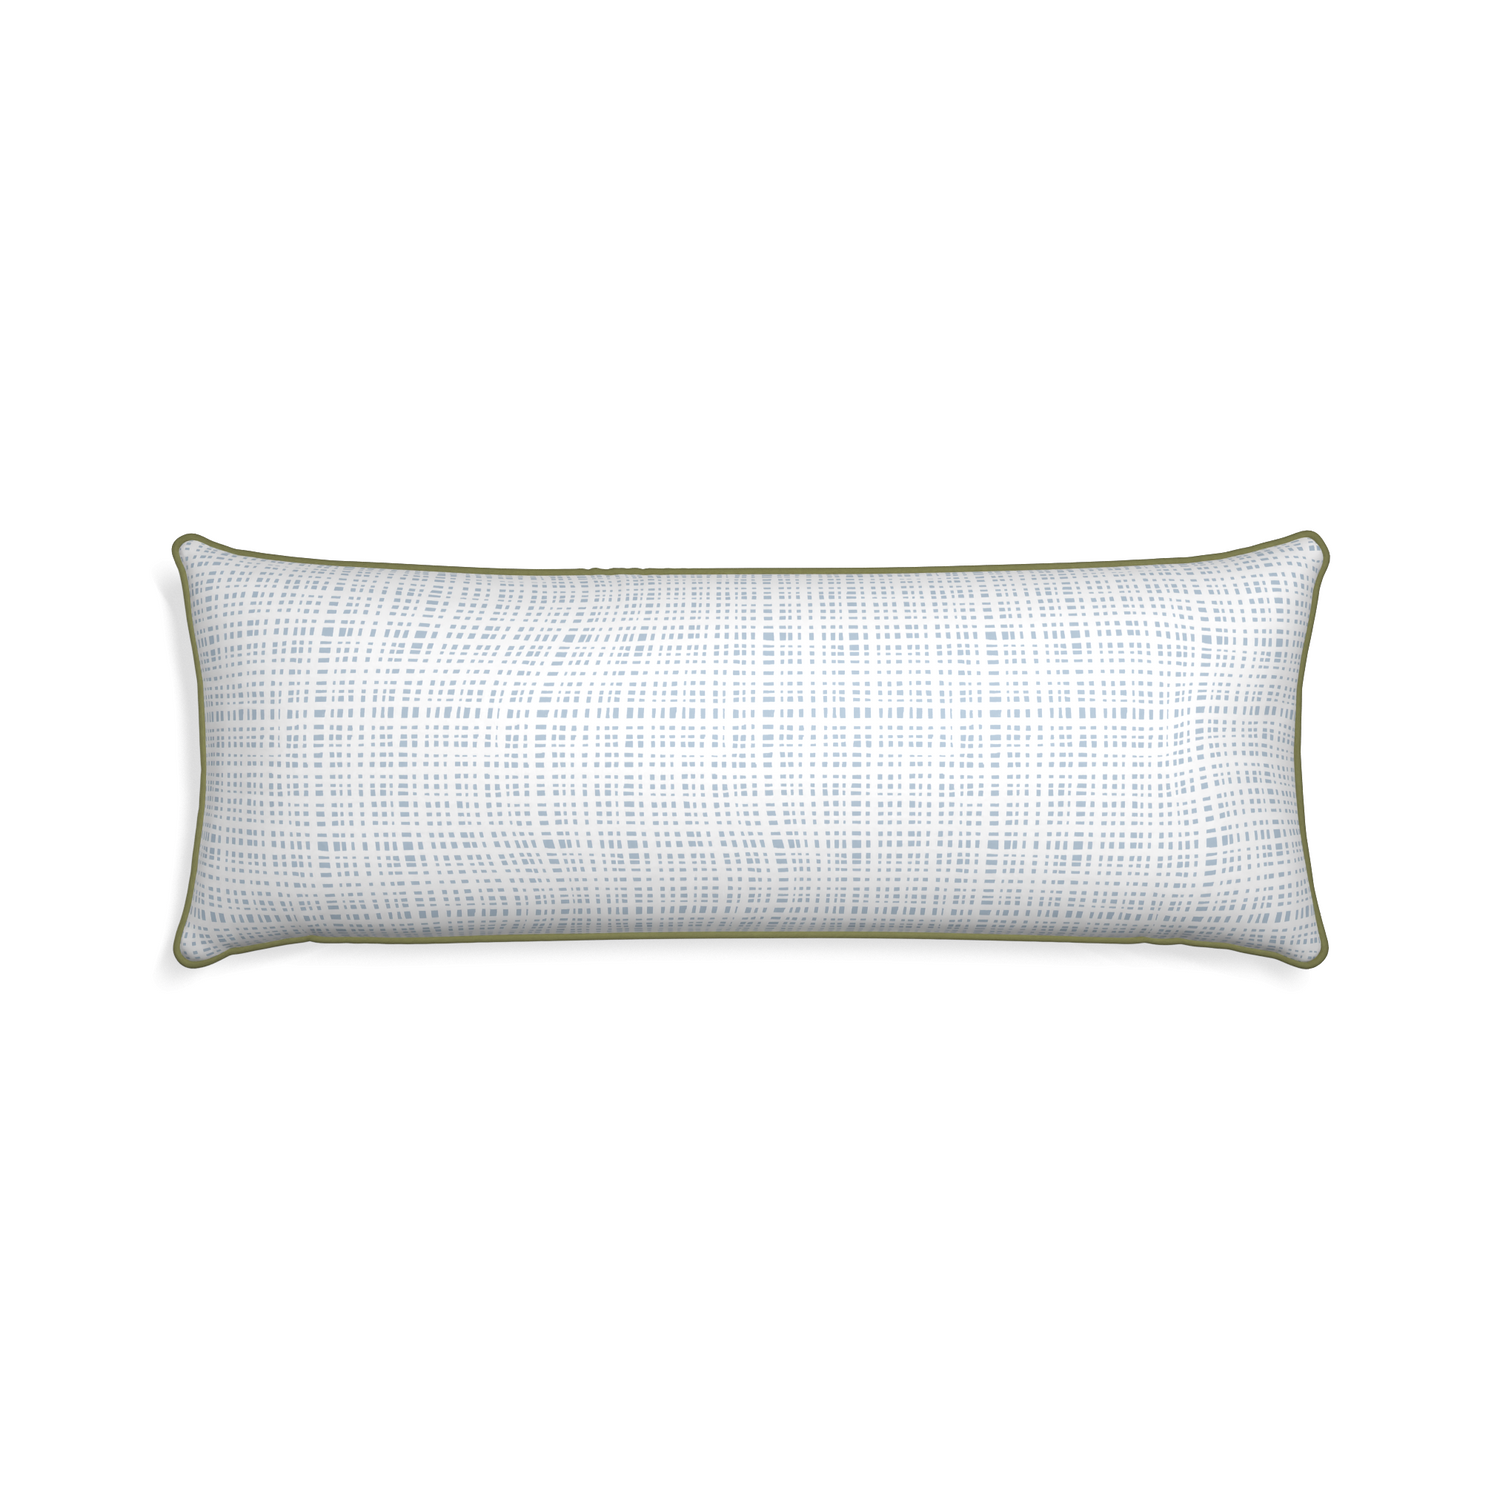 Xl-lumbar ginger sky custom plaid sky bluepillow with moss piping on white background